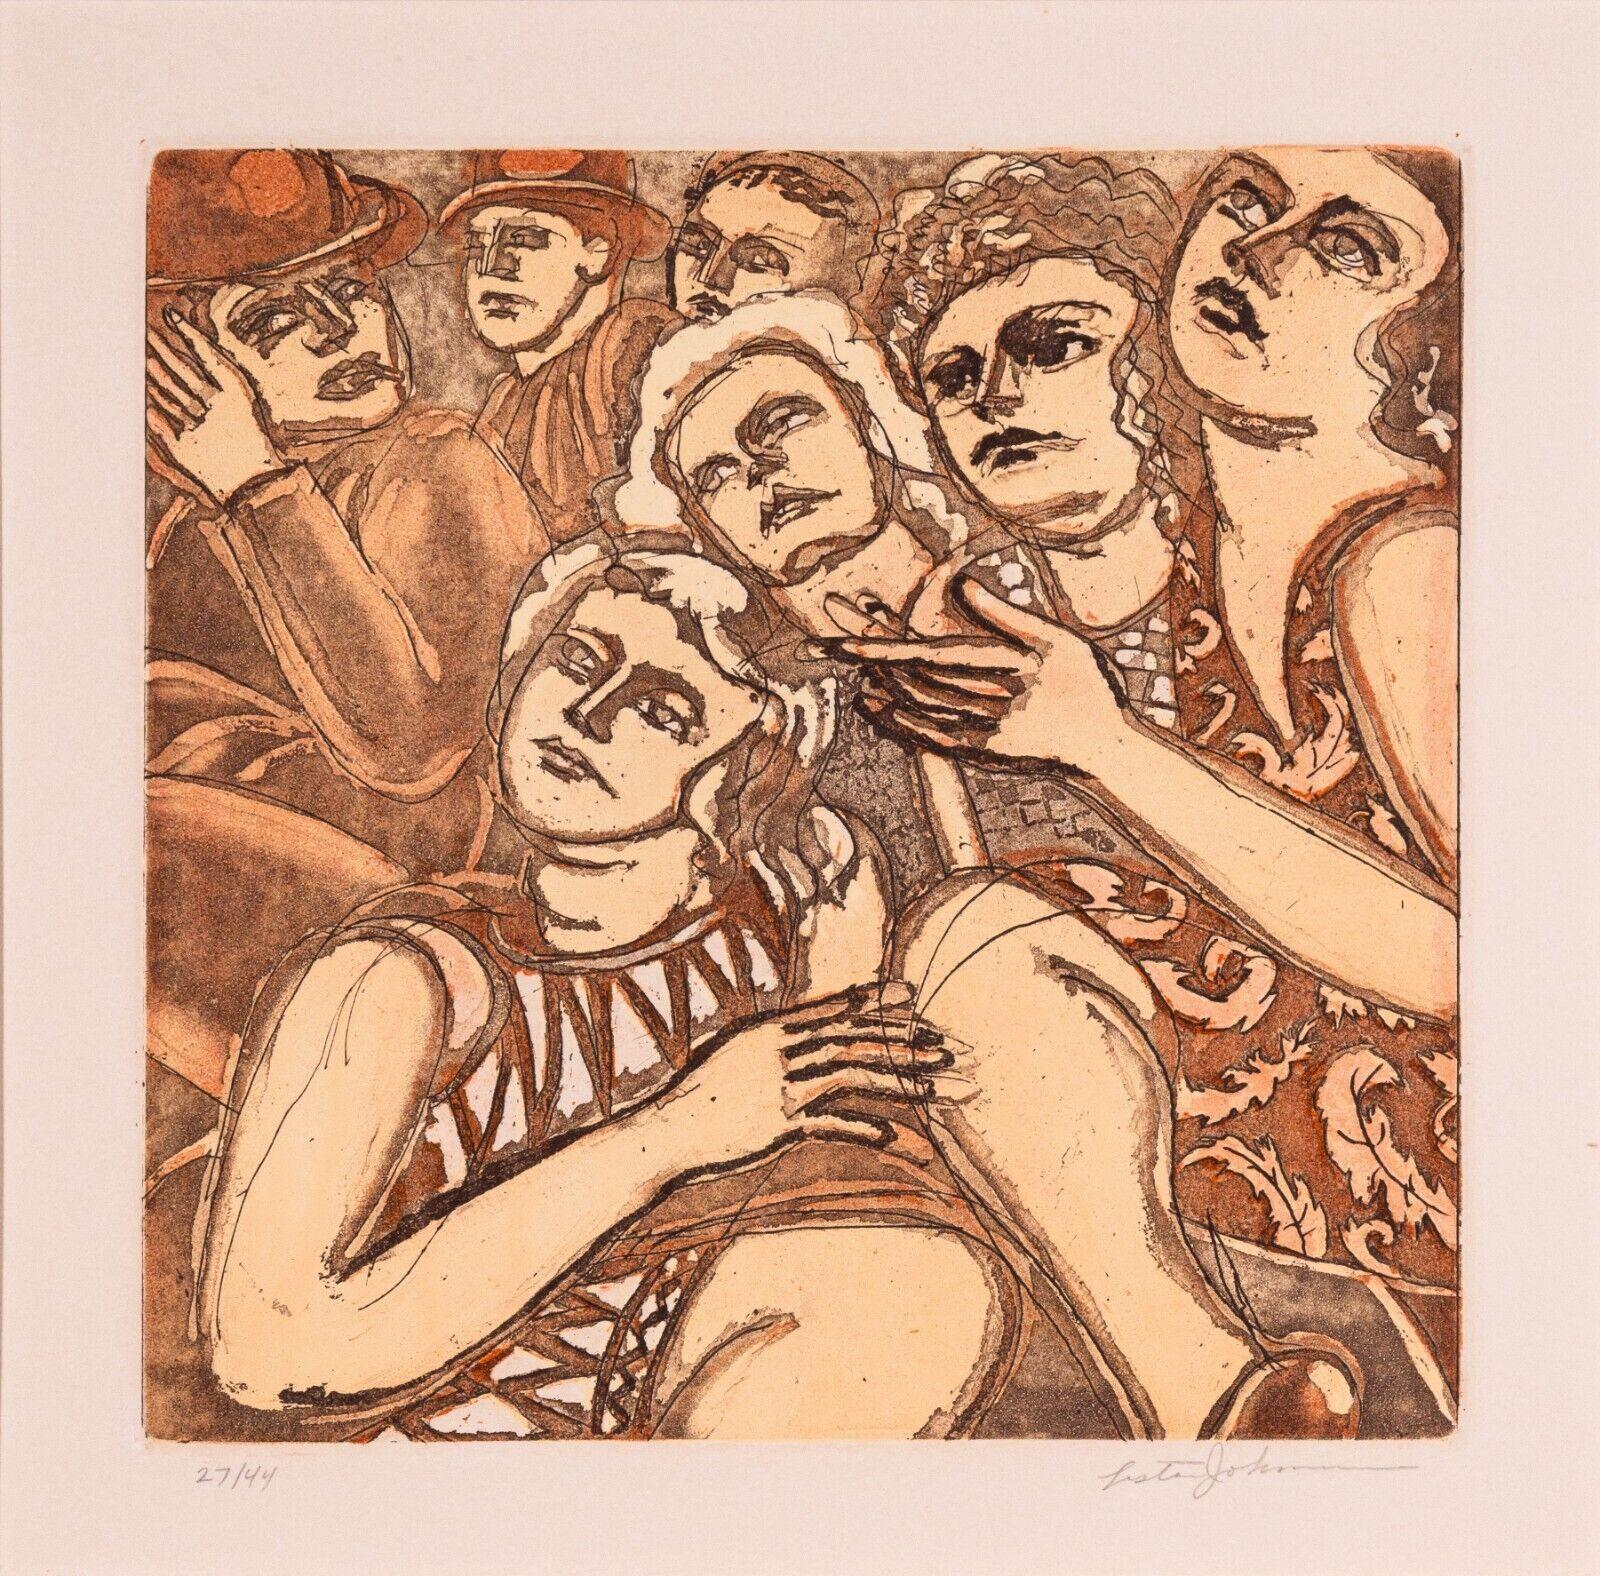 An expressive etching aquatint in color on wove paper titled 